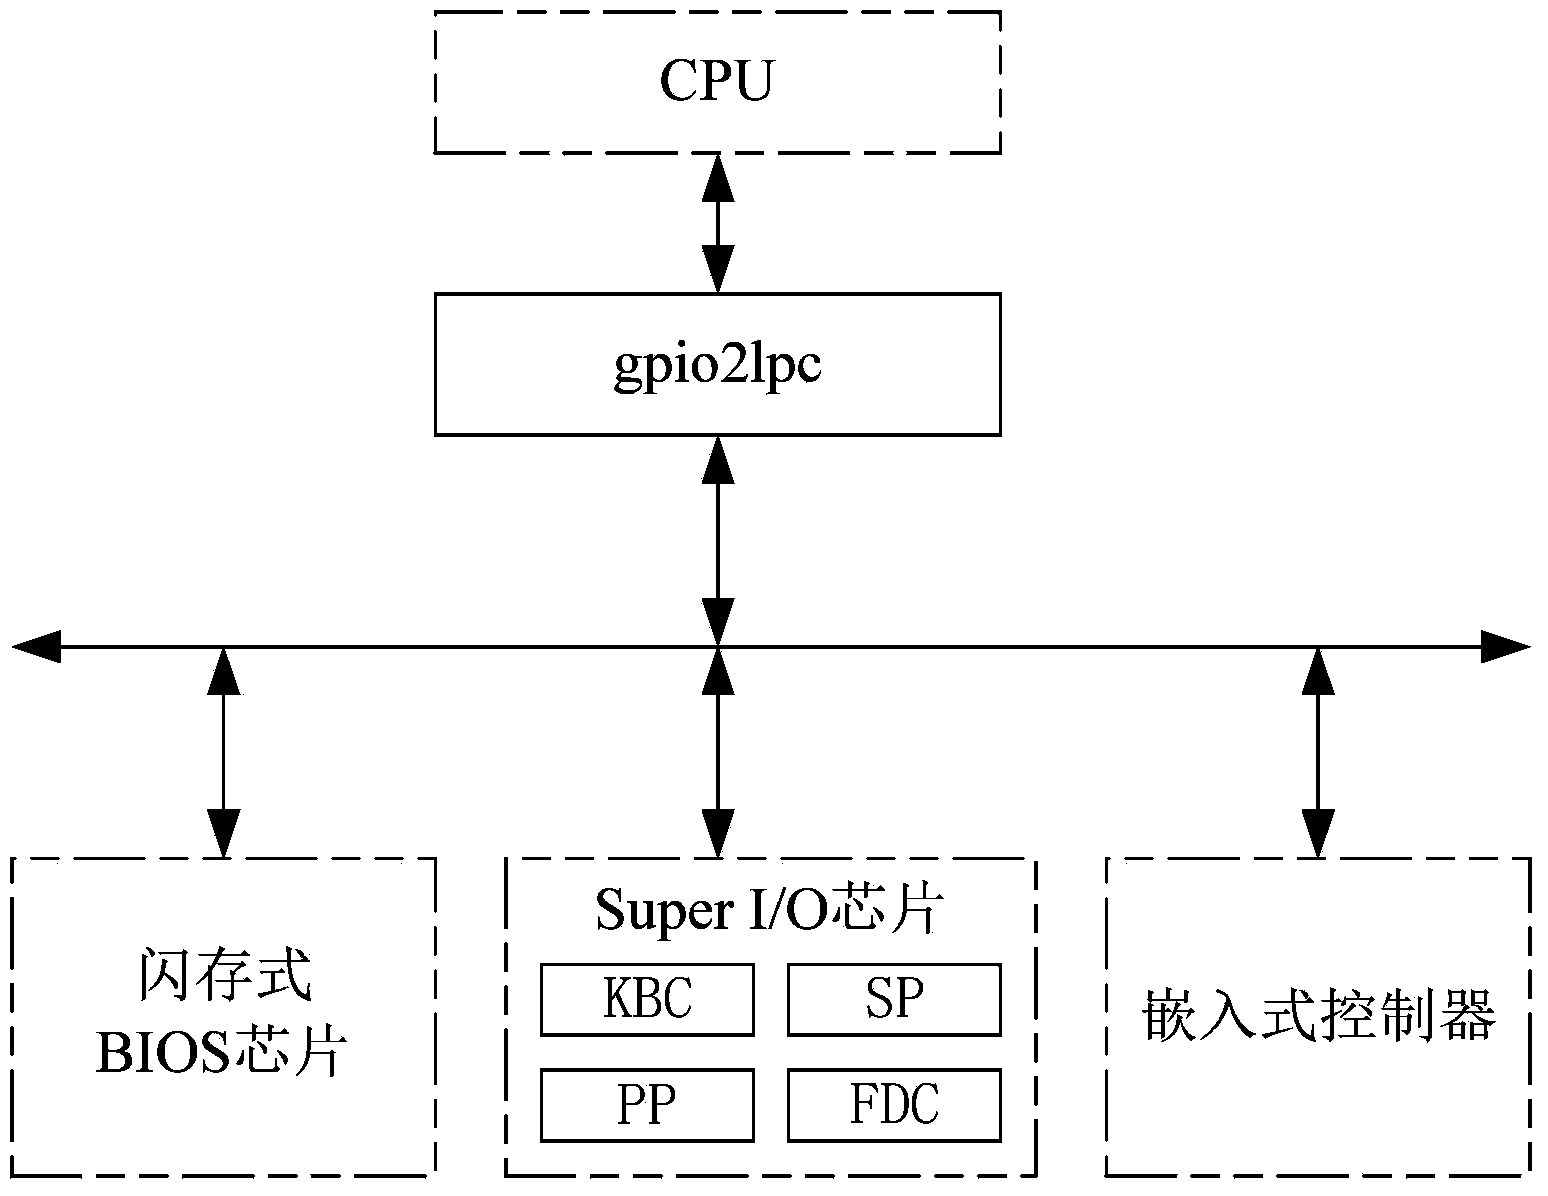 Method and device for expanding LPC (linear predictive coding) peripheral on basis of GPIO (general purpose input/output) interface